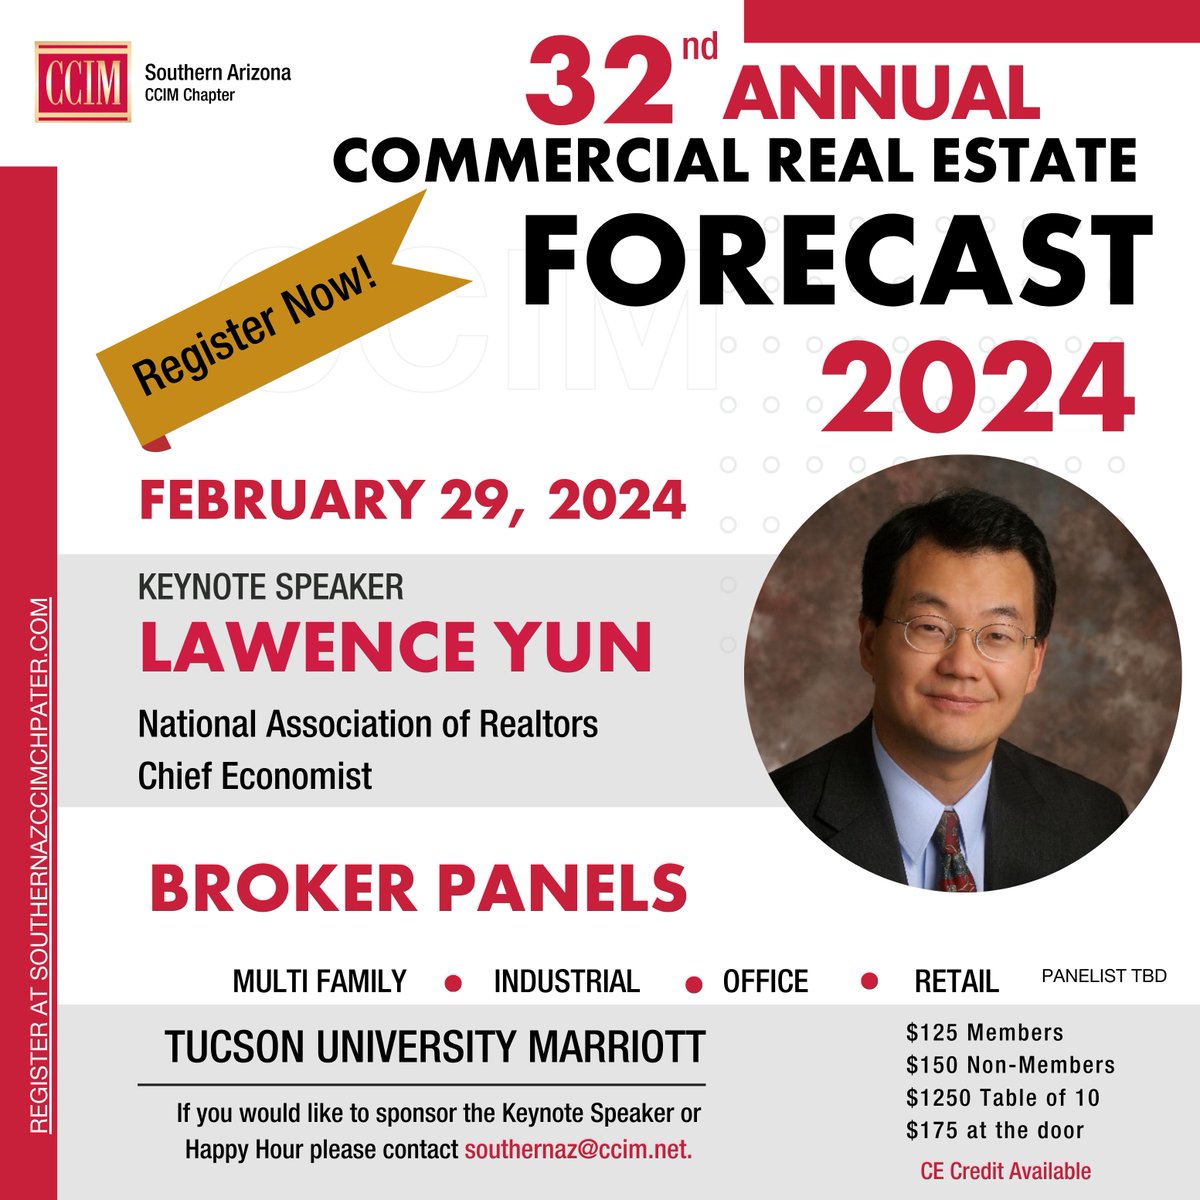 🏢🌟 Exciting News for Commercial Real Estate Enthusiasts! 🌟🏢

📈 Join us for the highly anticipated Southern Arizona CCIM Chapter Commercial Real Estate Forecast event, register Today!
#SAZCCIMForecast #CCIM #SAZCCIM #TucsonEvents #Tucson #SouthernArizona